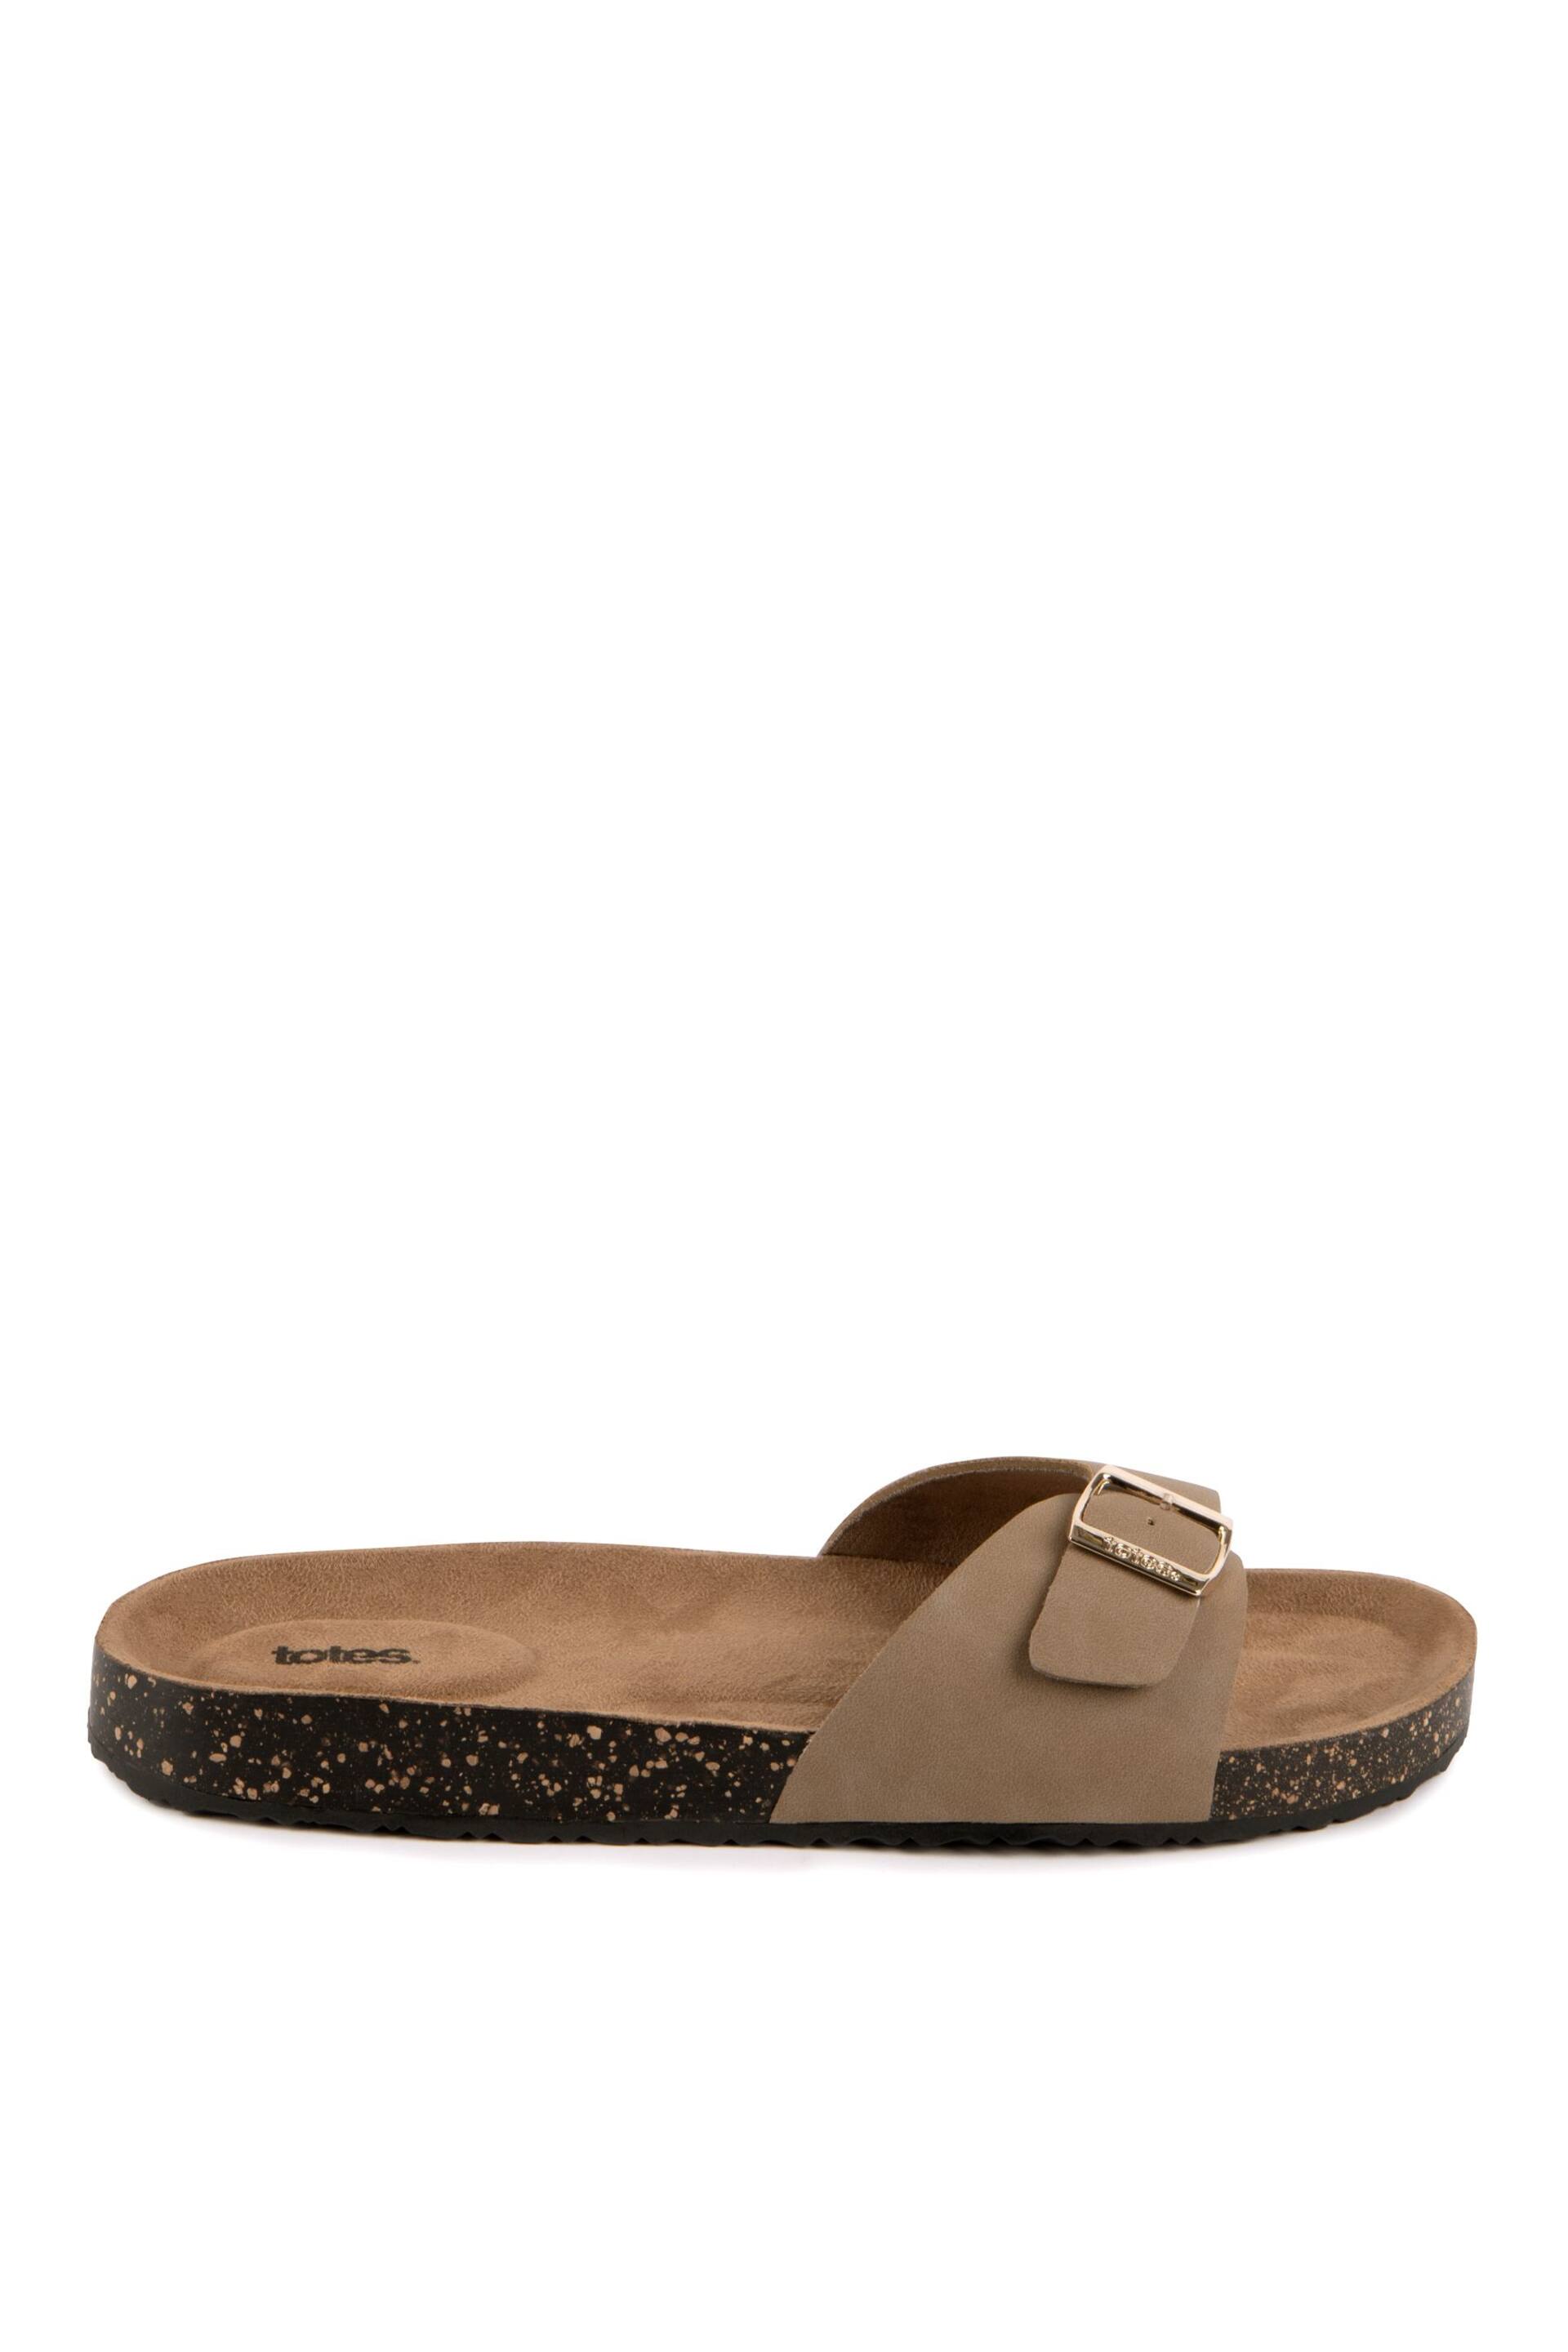 Totes Taupe Ladies Buckle Sandals - Image 2 of 5